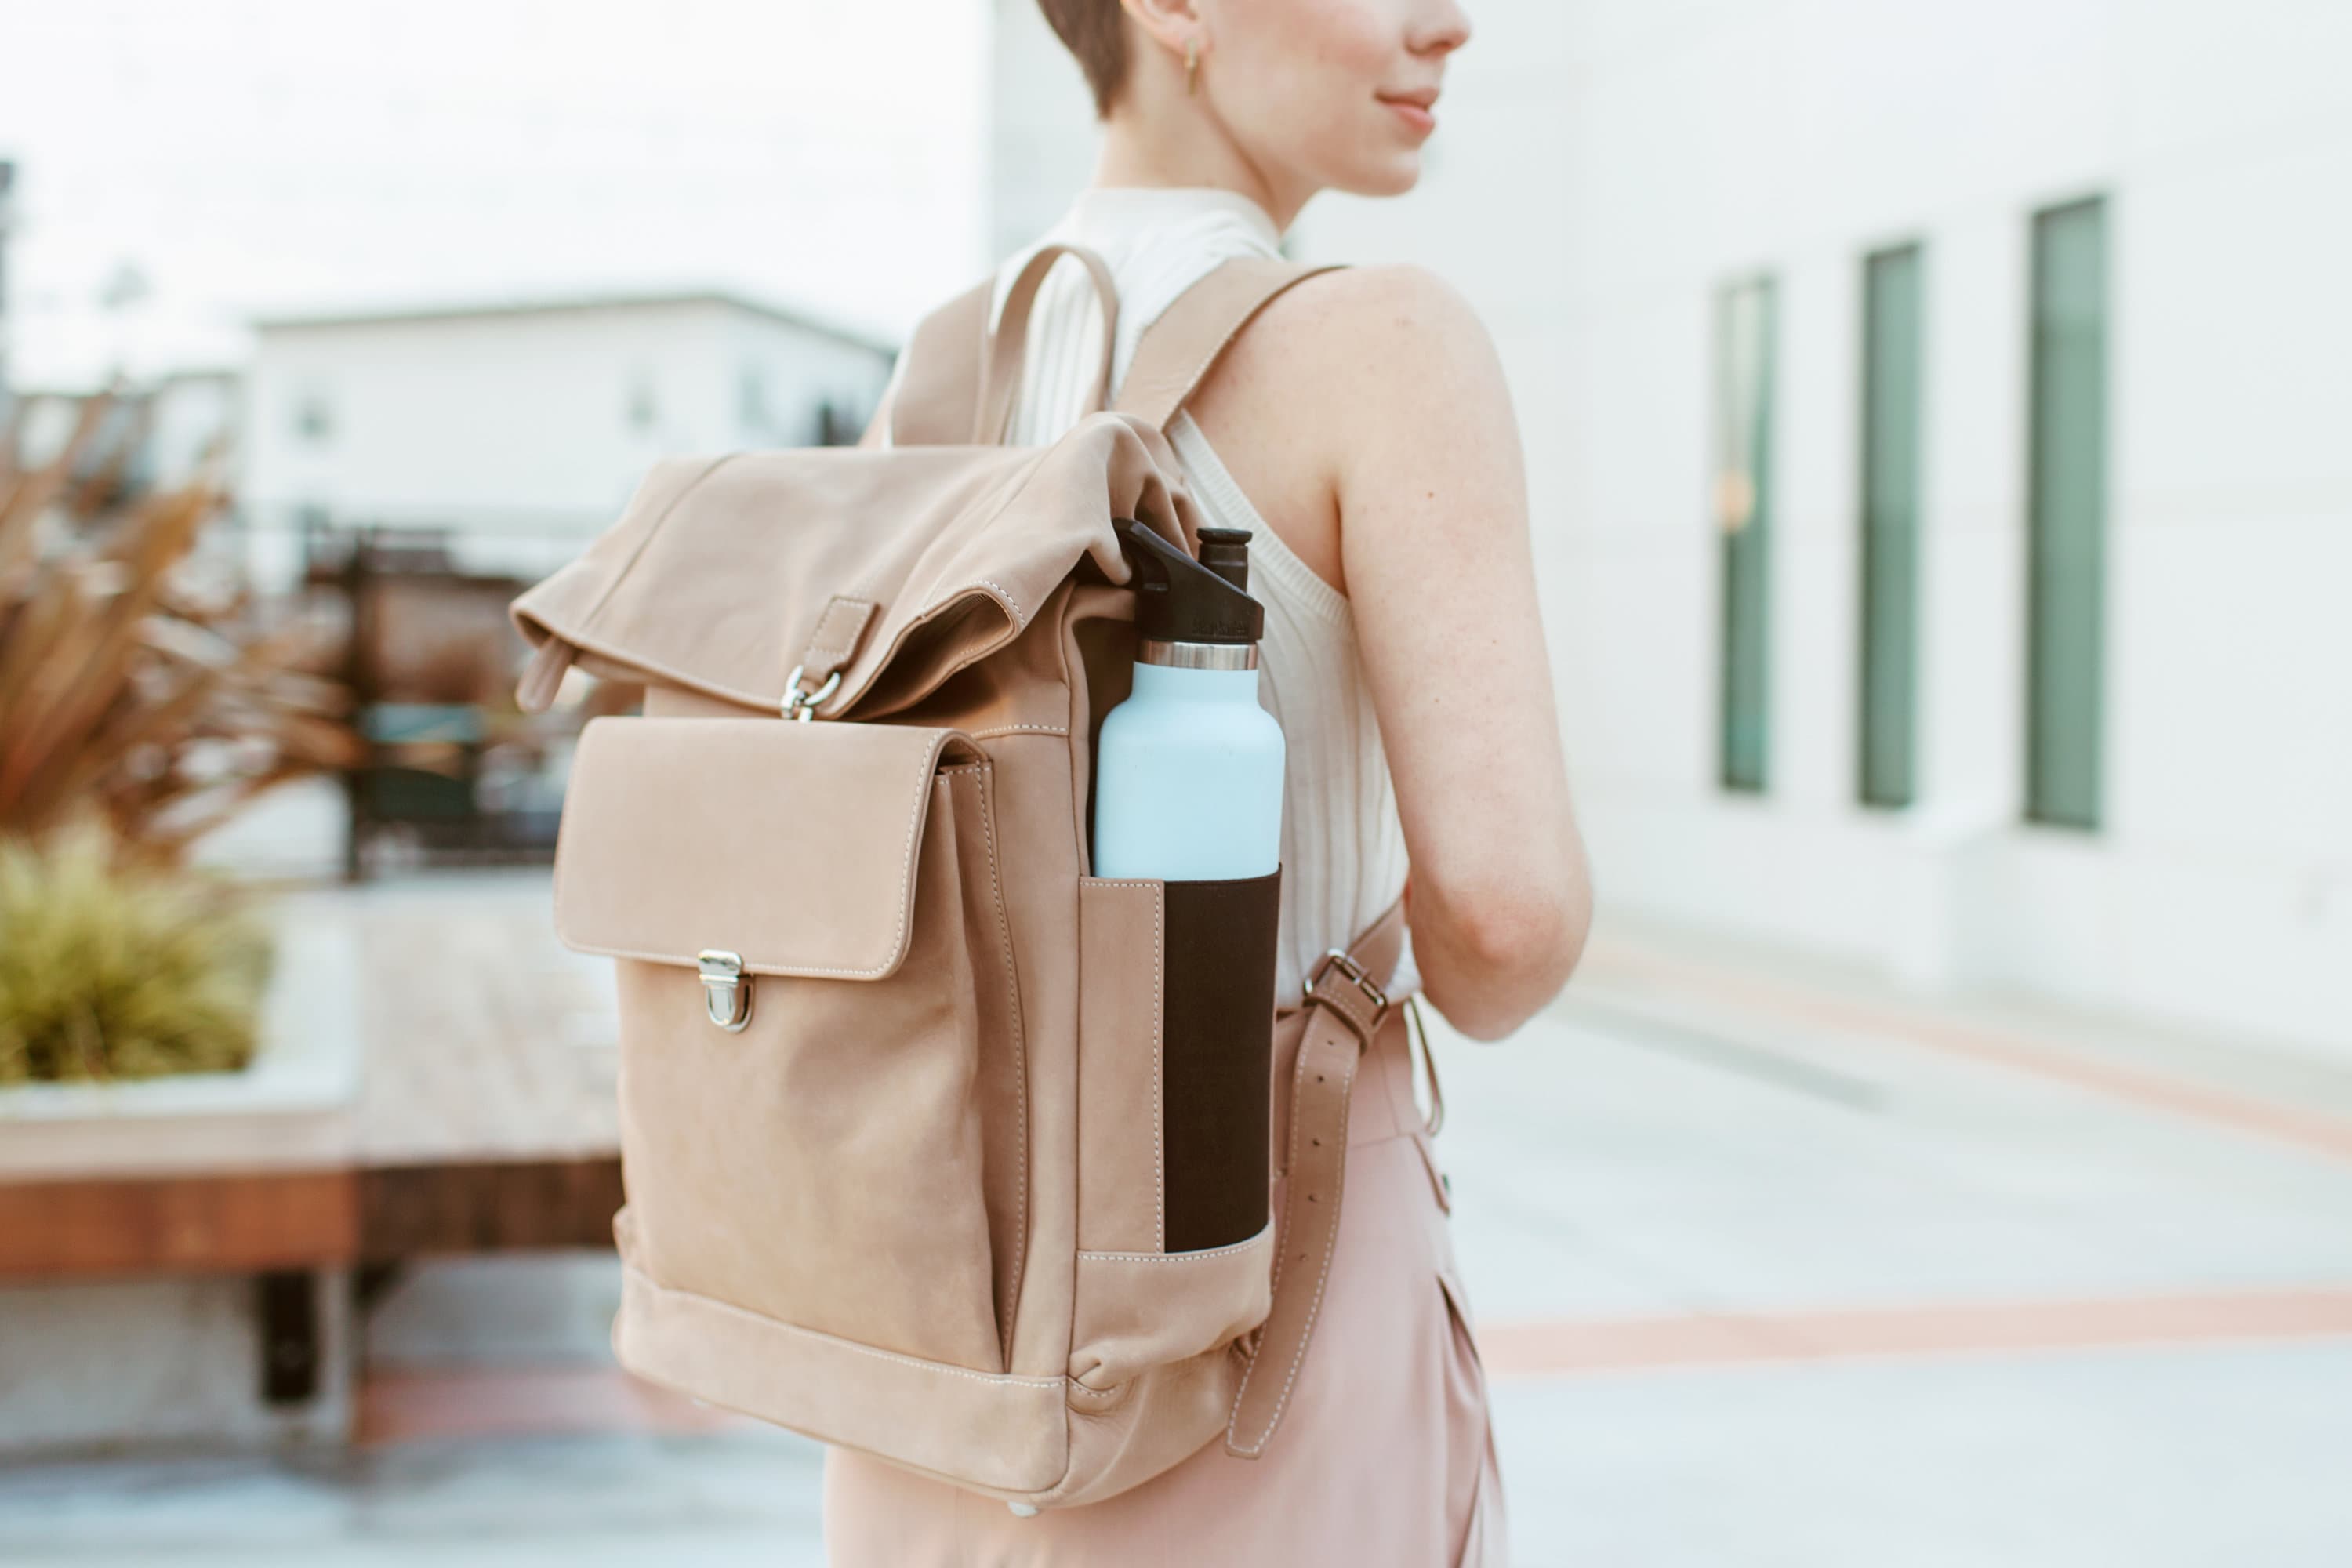 This Backpack Purse Has 11000 FiveStar Amazon Ratings